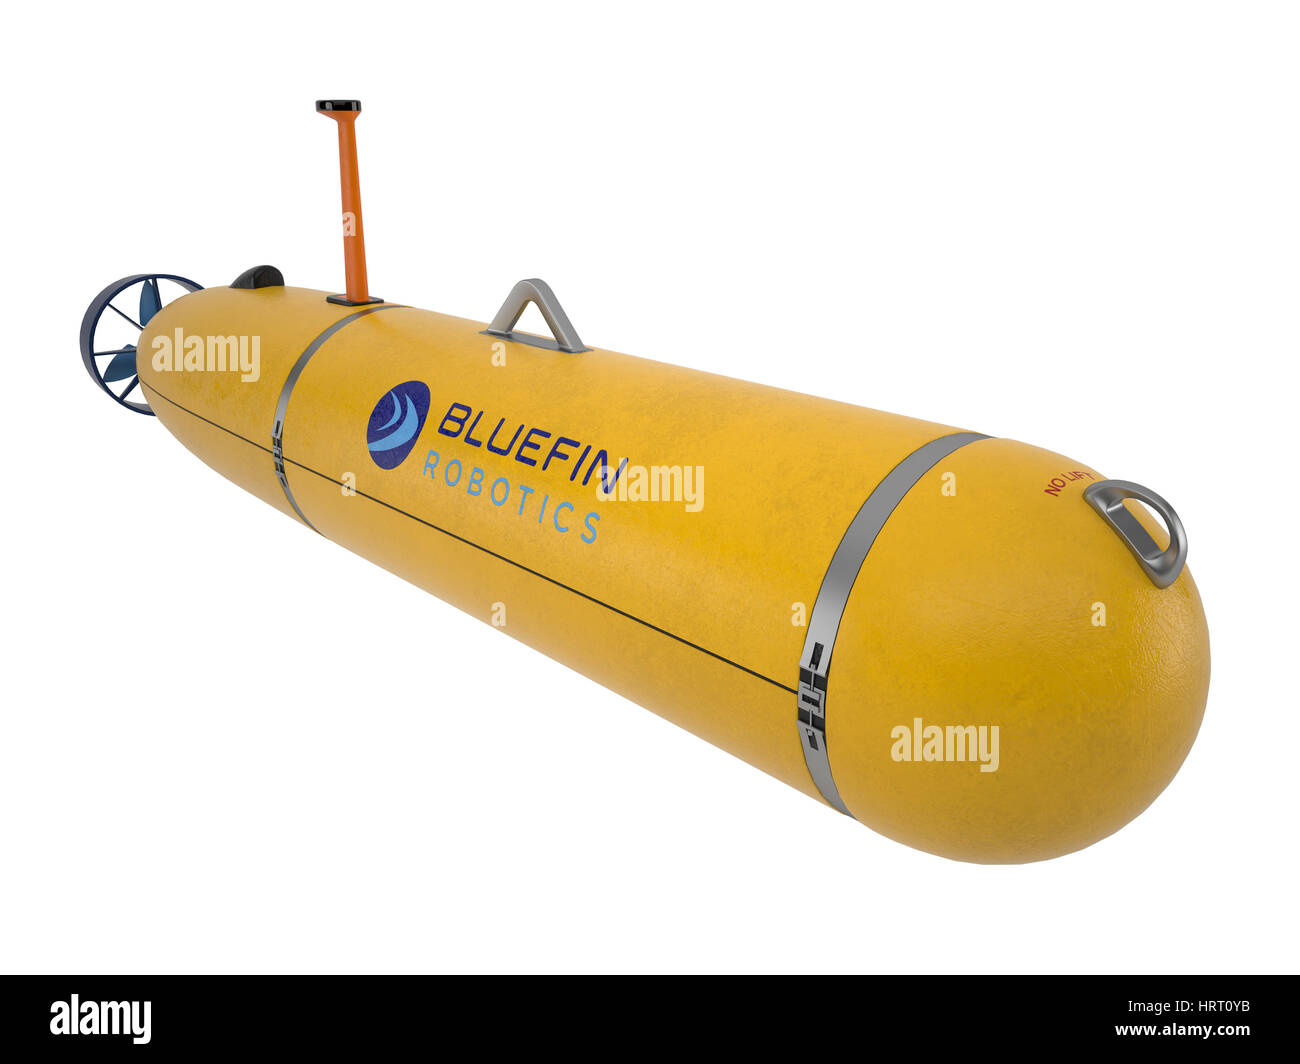 Bluefin 21 Autonomous underwater vehicle. These images are rendered in a 3d software package. Stock Photo